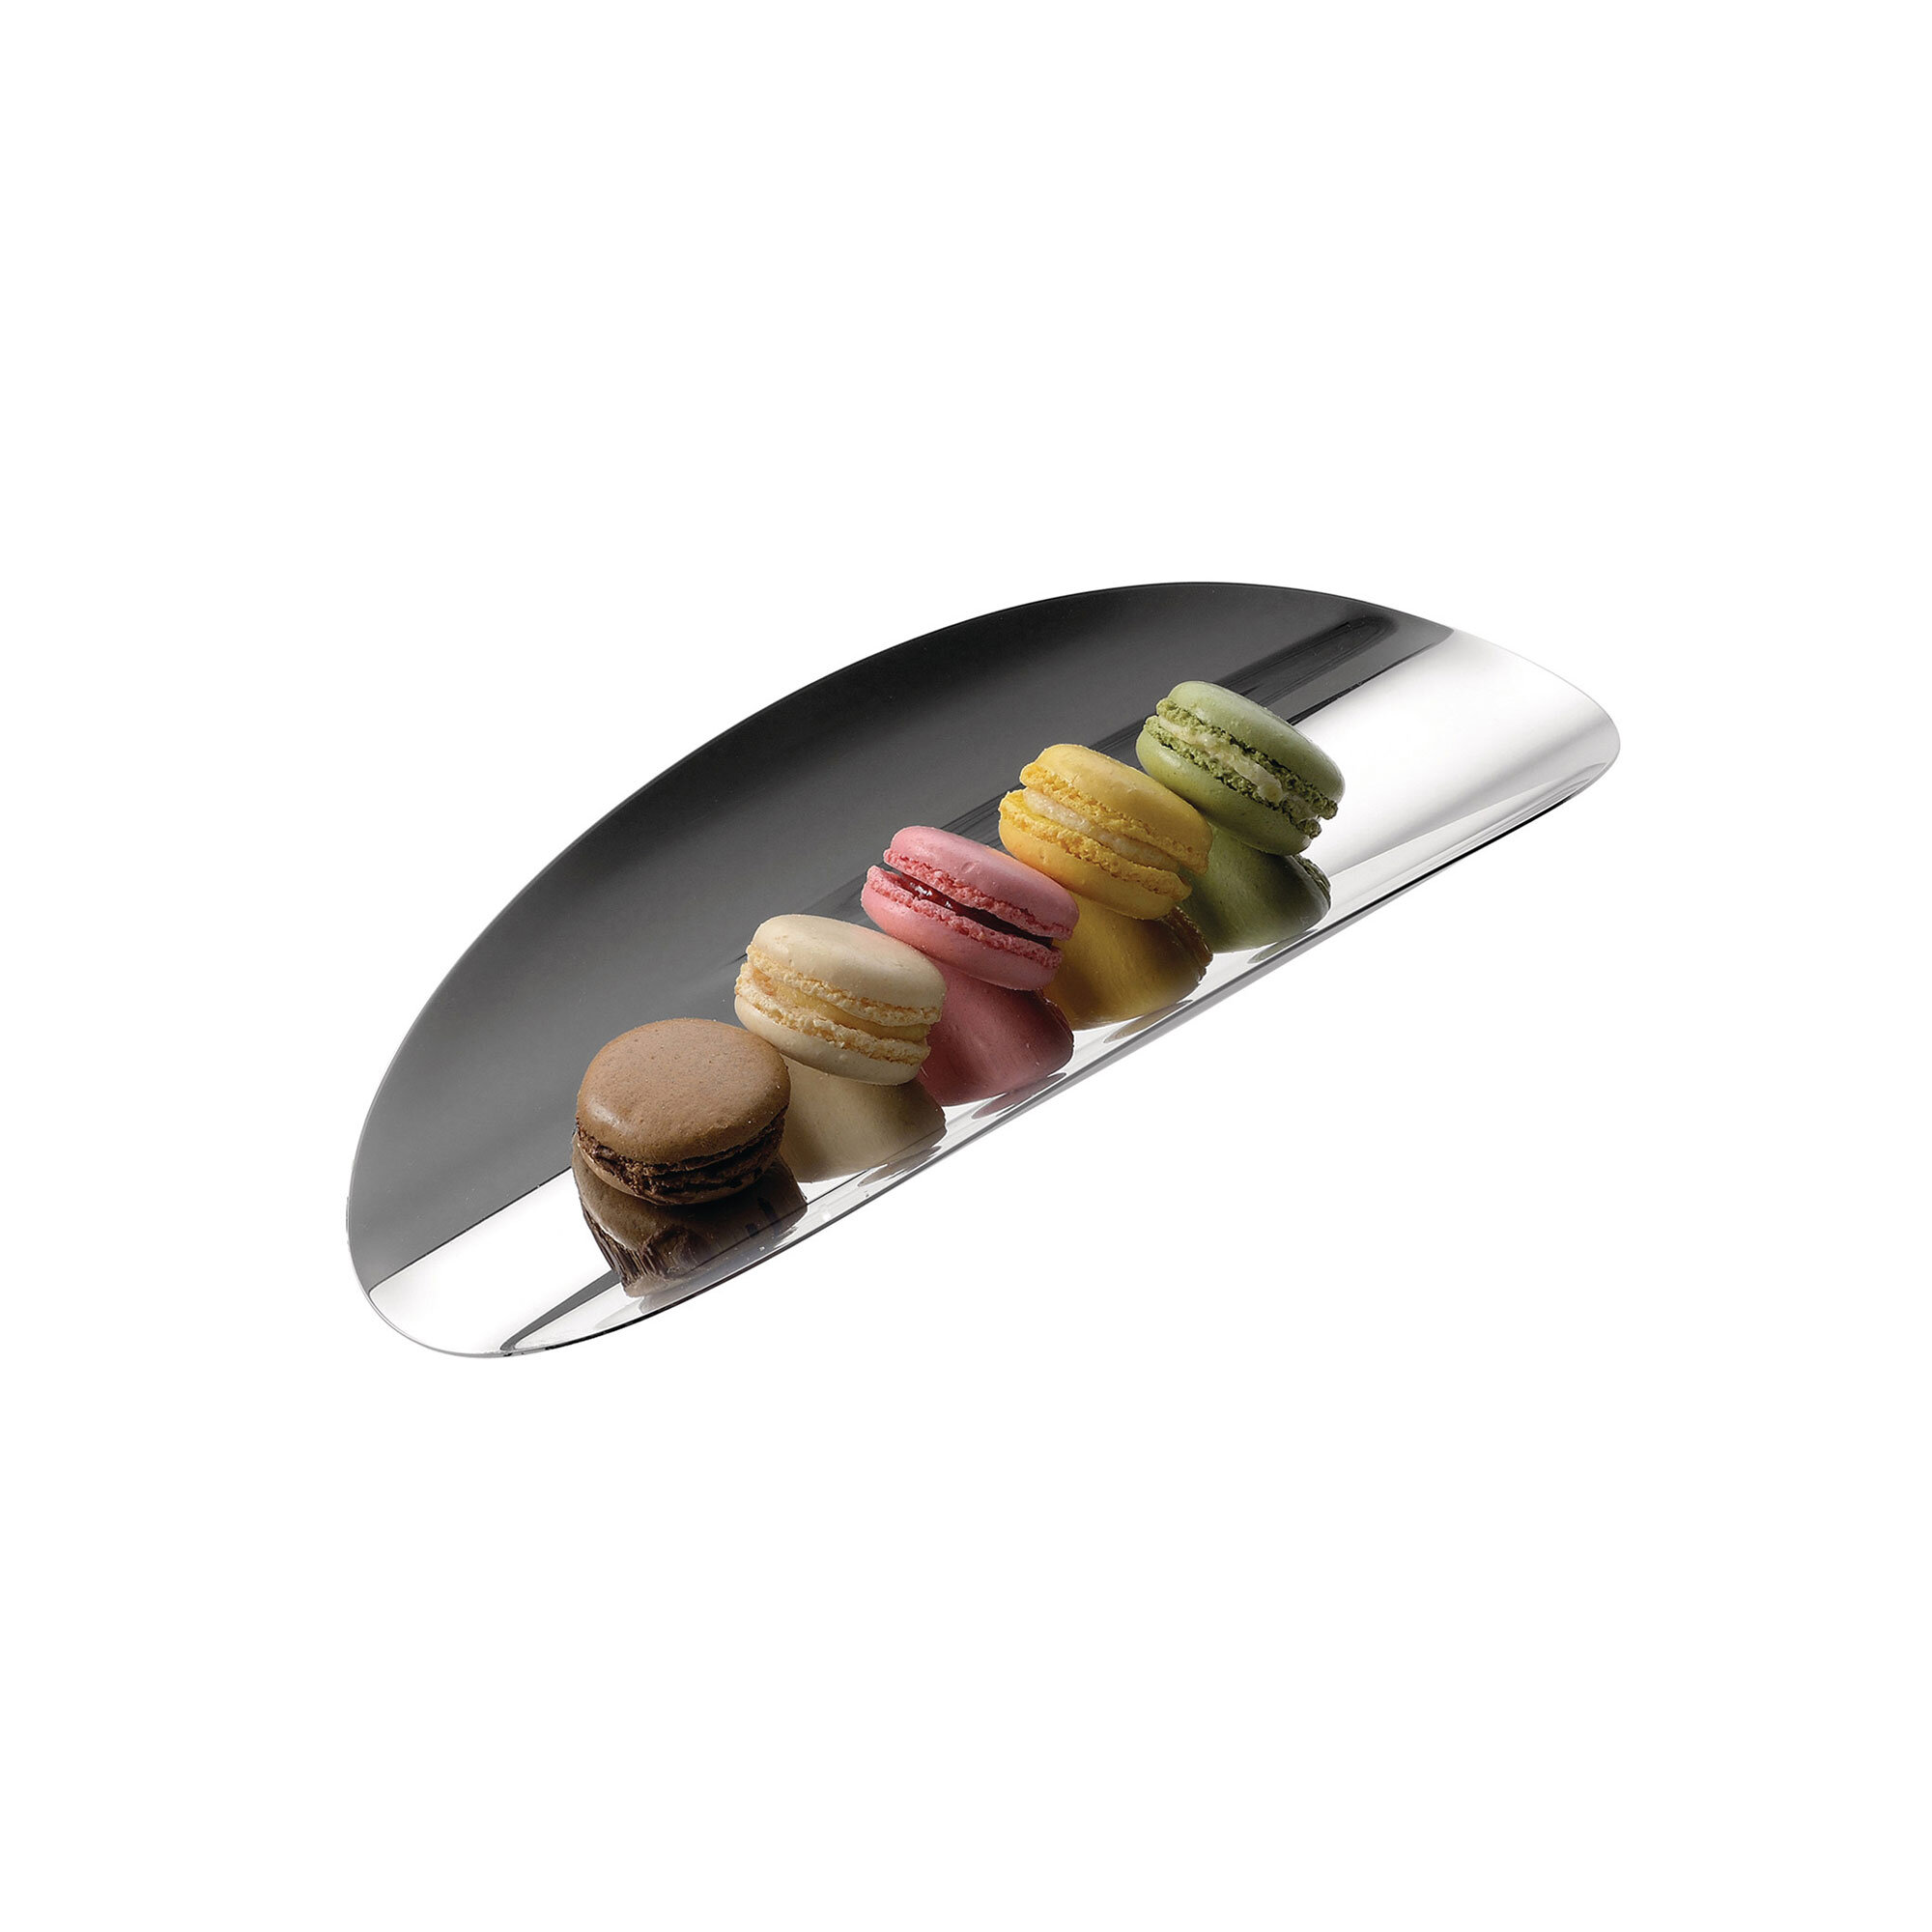 WEB_Abi-Alice_Ellipse-for-Alessi_-Stainless-Steelwith-Macaroons_-2000pxl_RGB.jpg